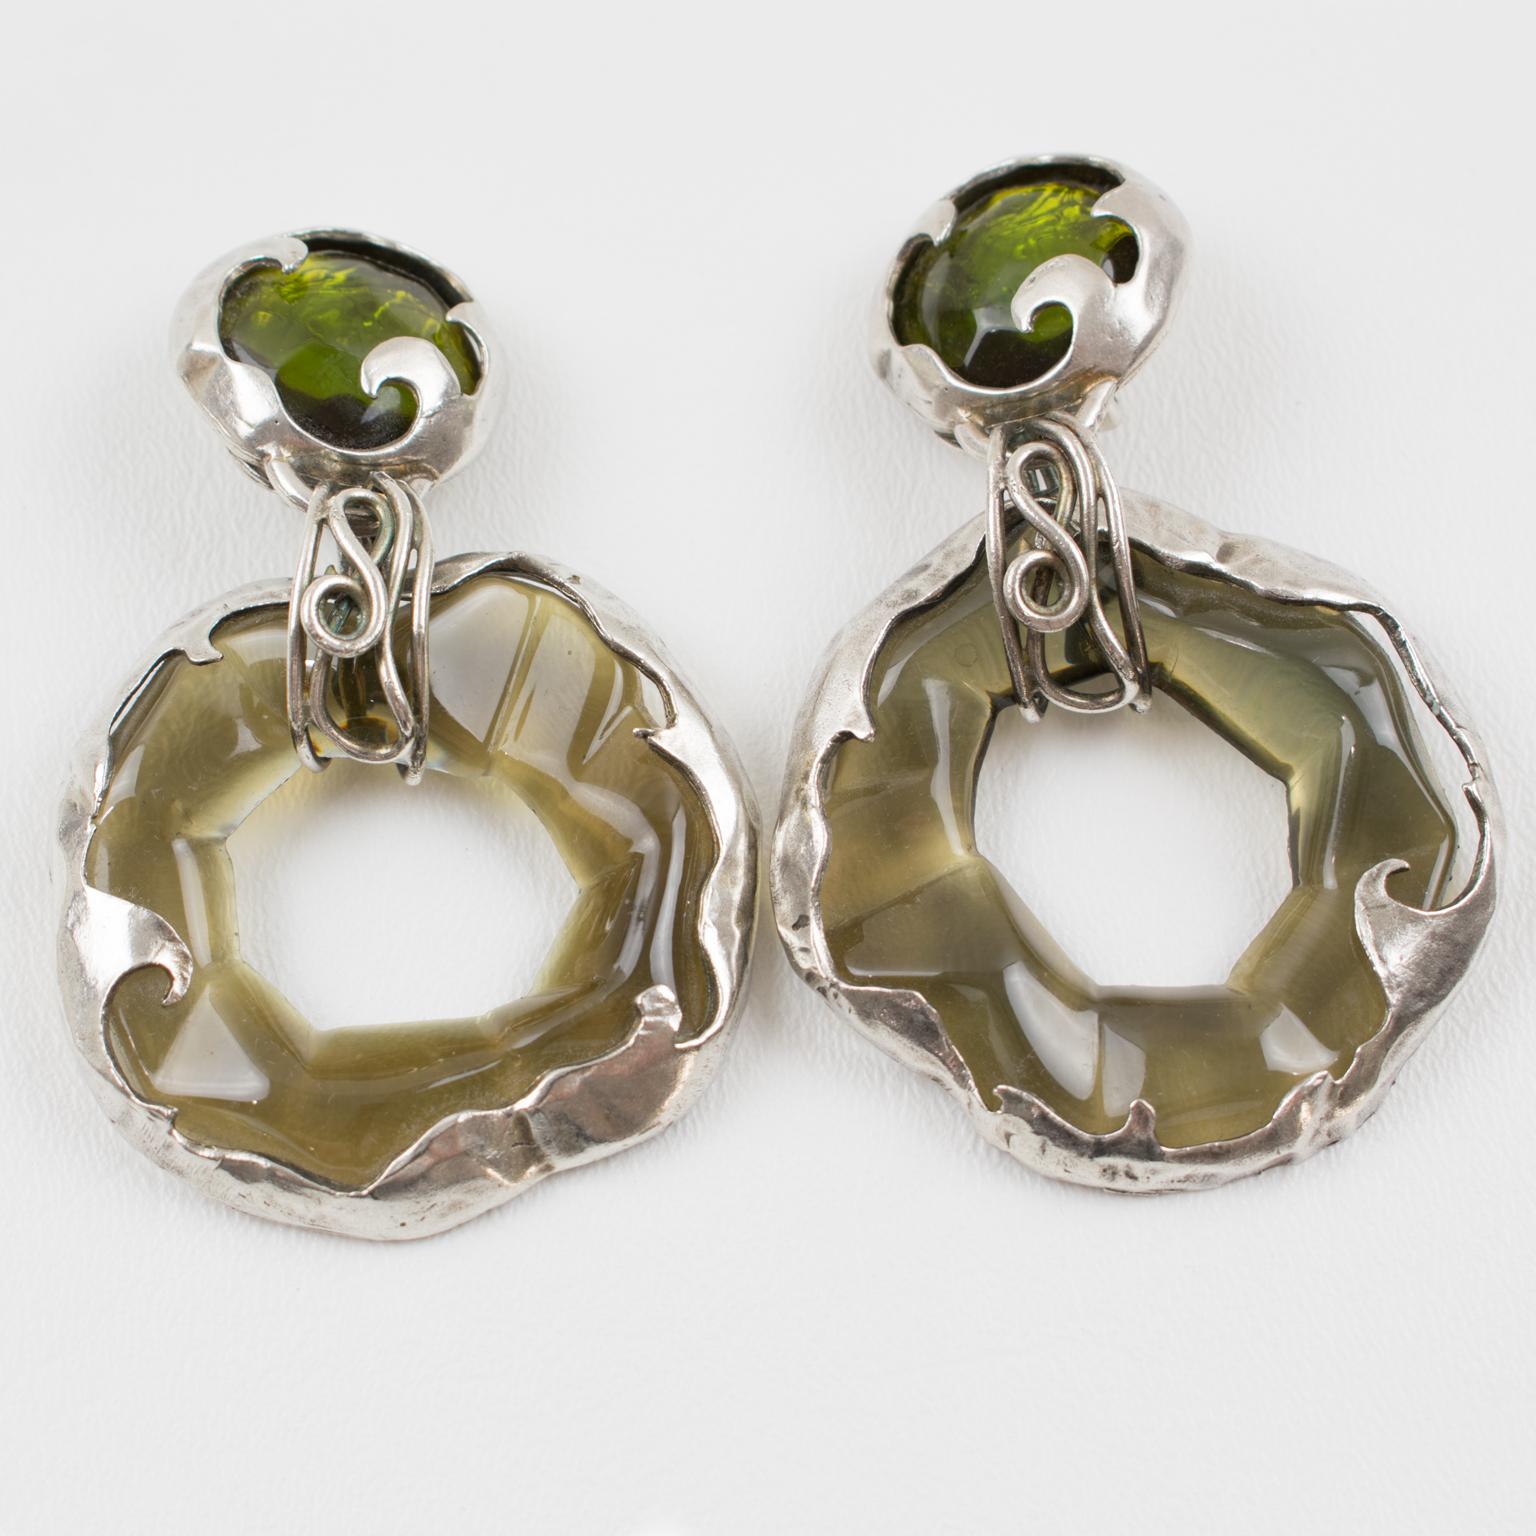 Modernist Oversized Brutalist Green Lucite and Silver Plate Clip Earrings